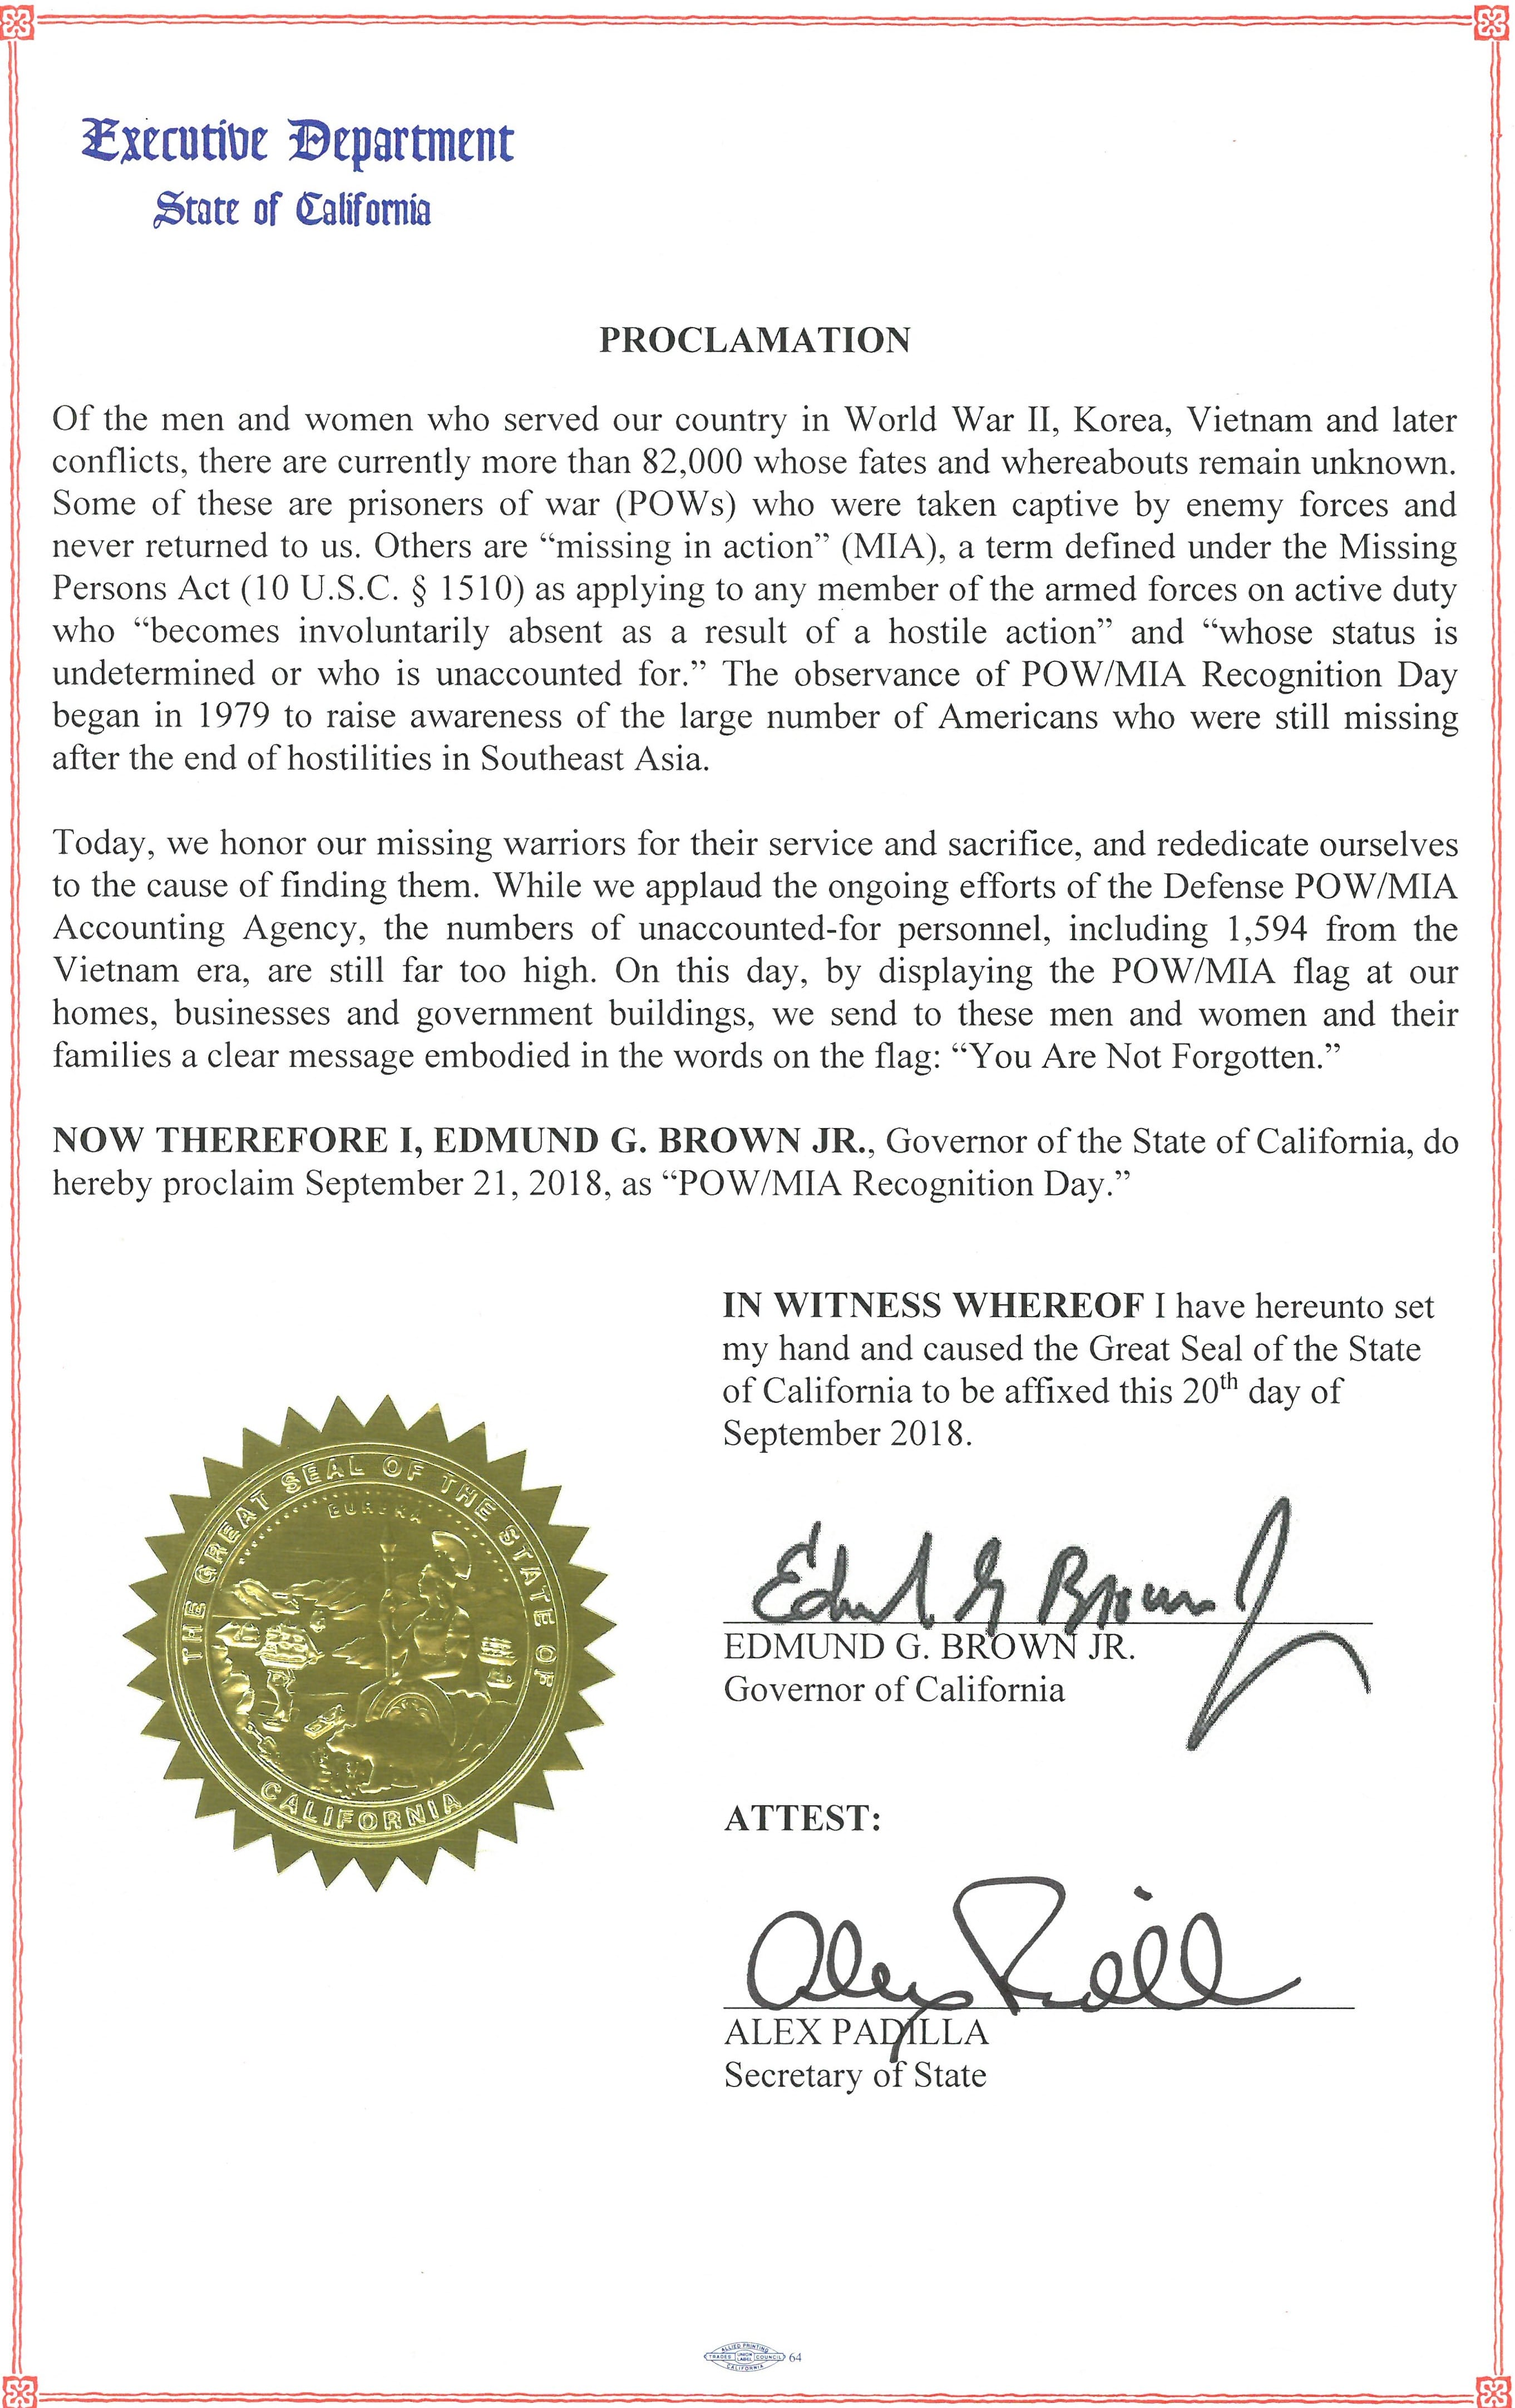 Governor Brown Issues Proclamation Declaring POW/MIA Recognition Day